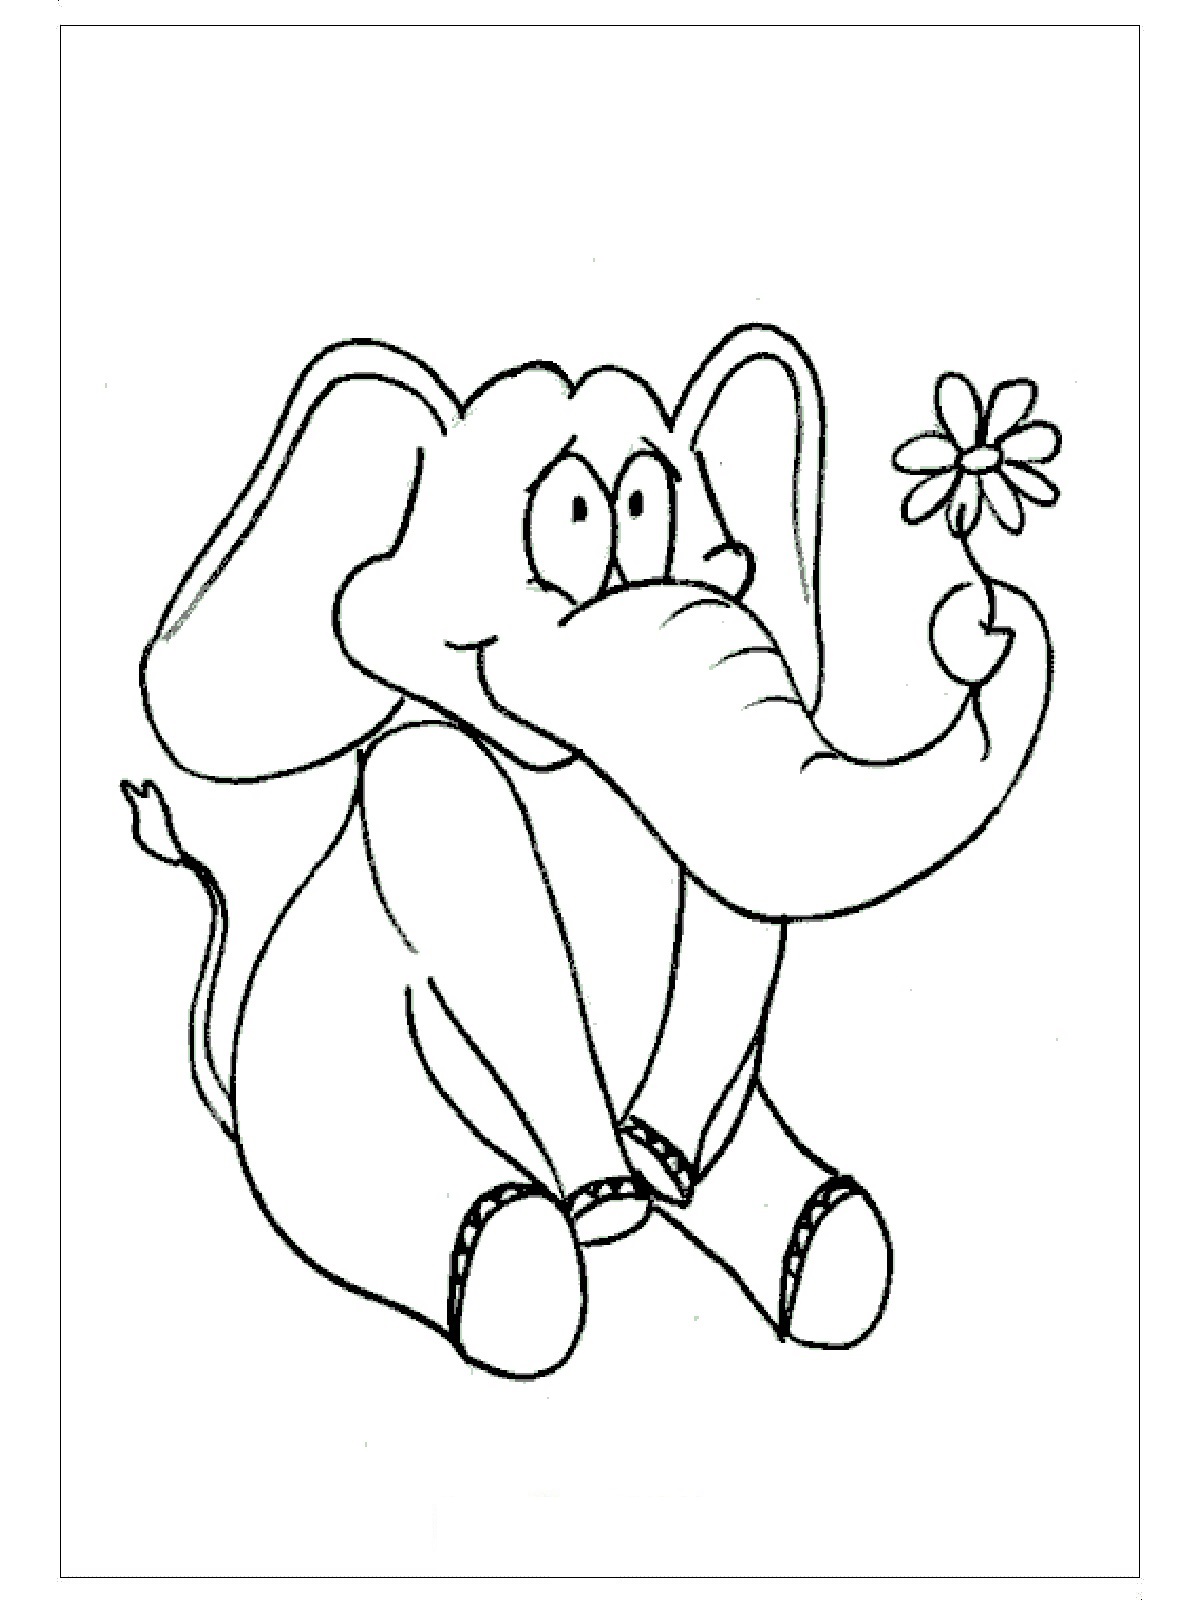 Download Elephant Coloring Pages For Kids - Preschool and Kindergarten